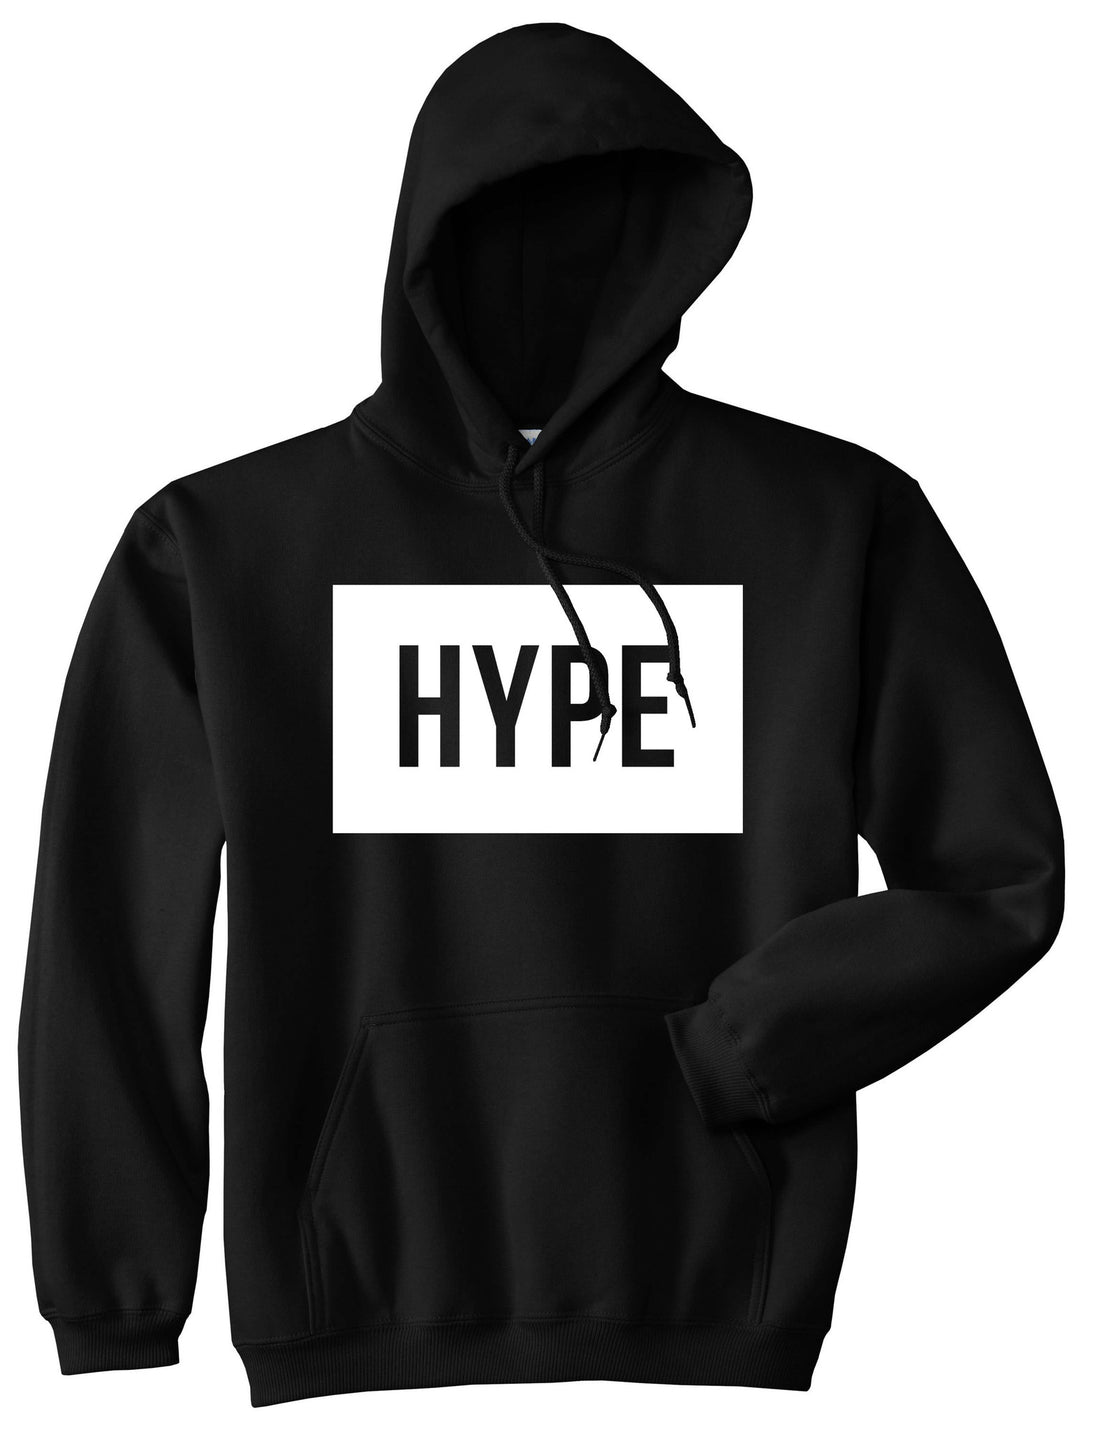 Hype Style Streetwear Brand Logo White by Kings Of NY Boys Kids Pullover Hoodie Hoody In Black by Kings Of NY